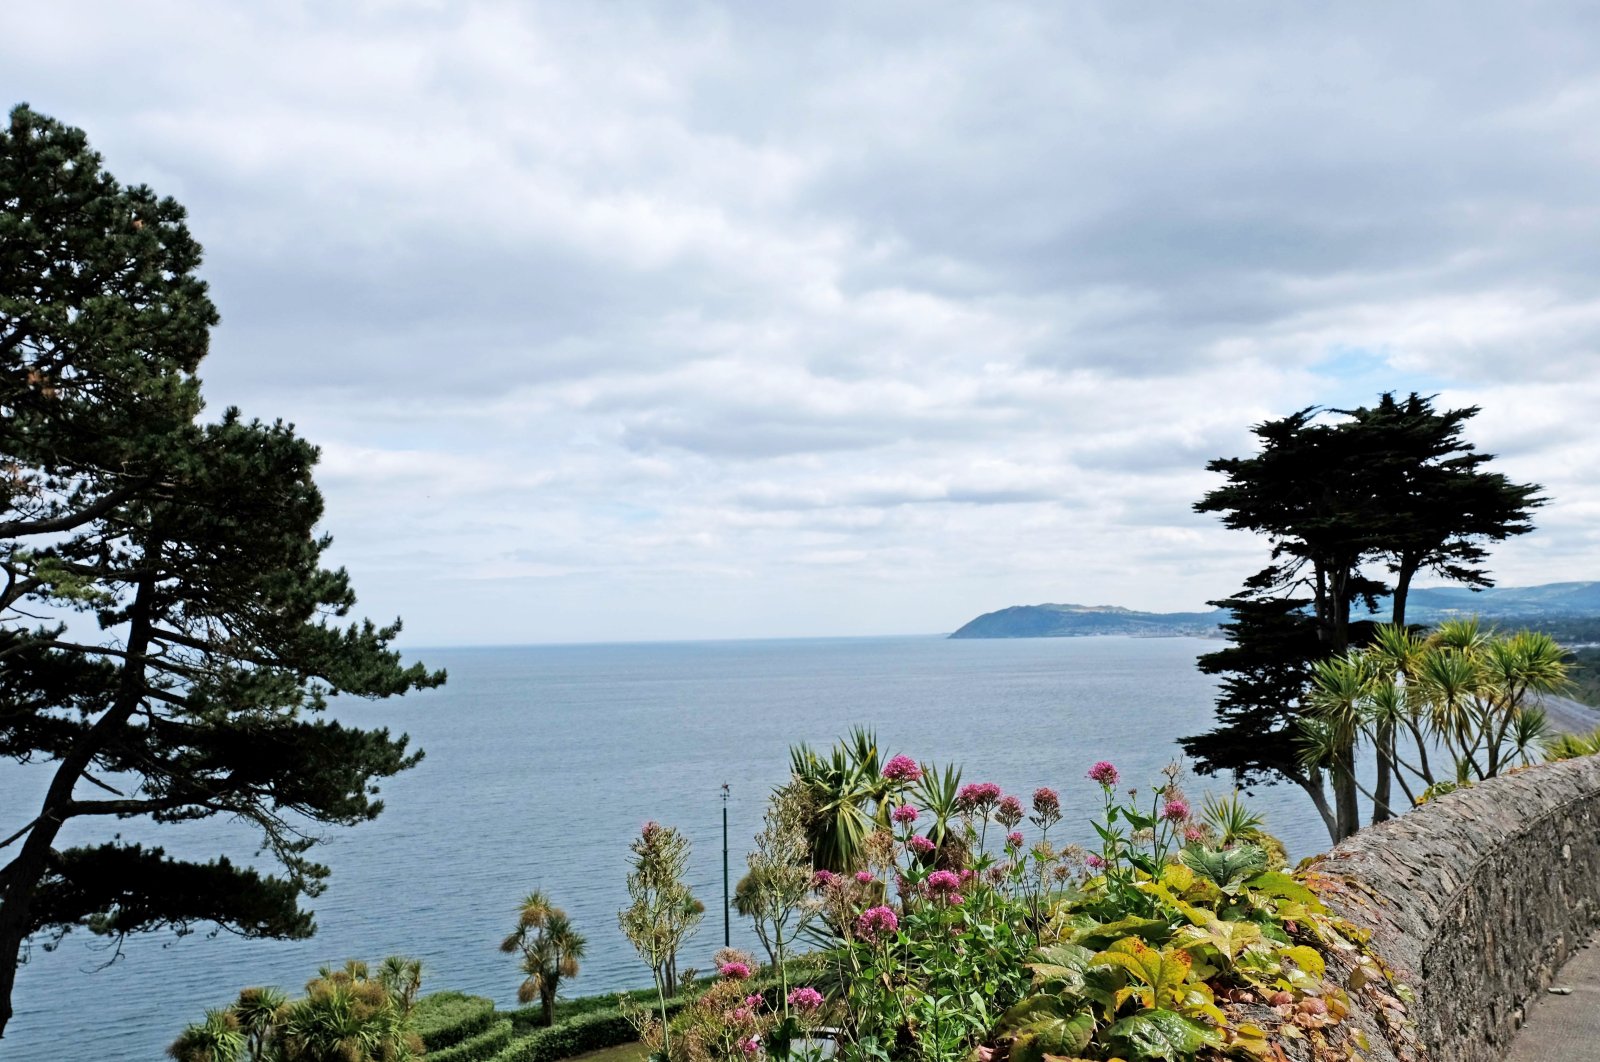 Italy? Greece? No, the Irish Sea. At the viewpoint in Sorrento Park in Dalkey, the coastline feels almost Mediterranean. (dpa Photo)